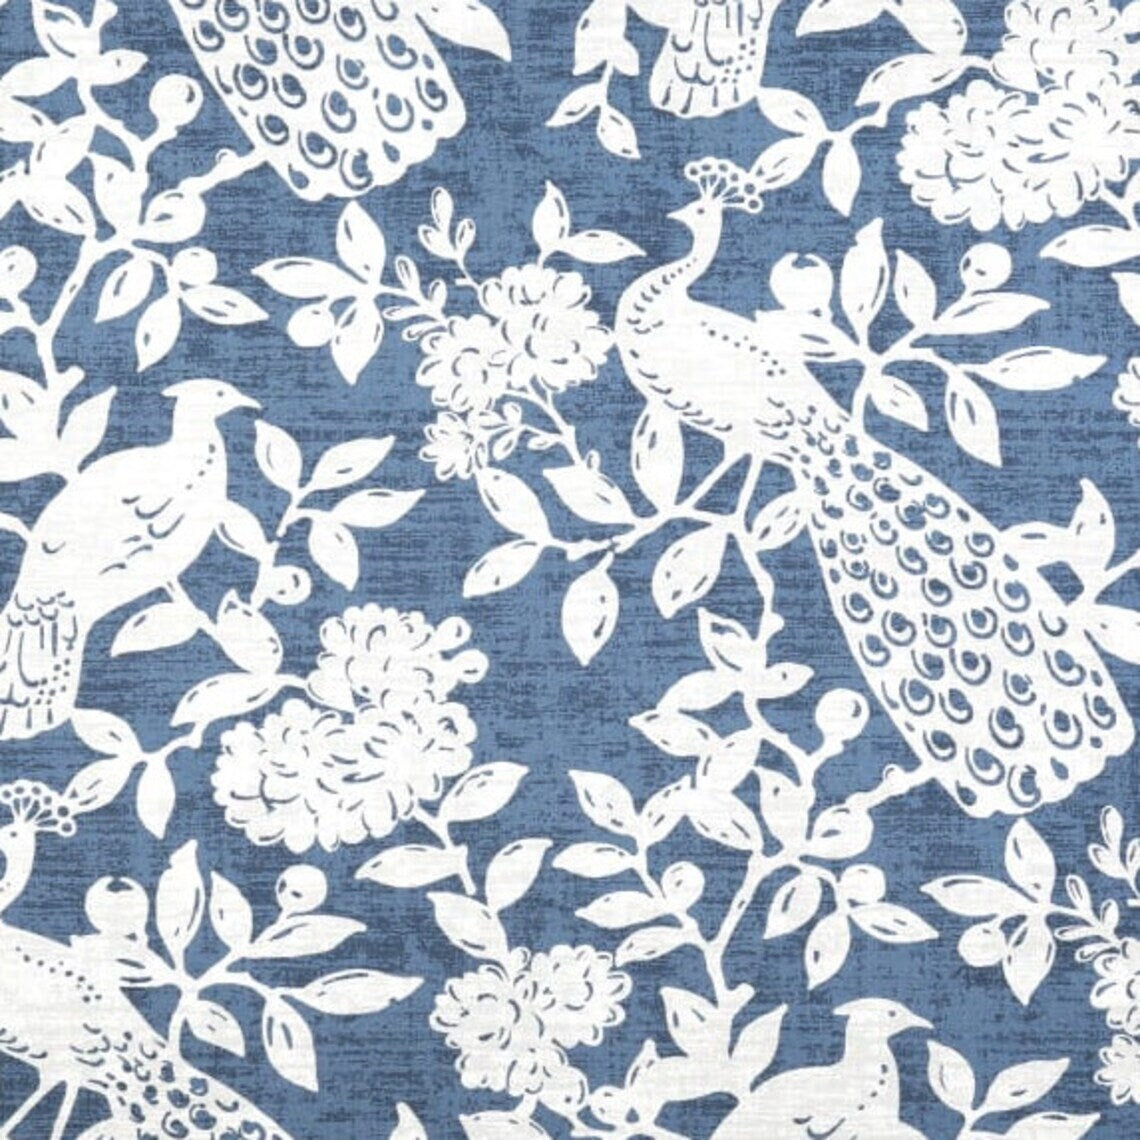 Bed Scarf in Birdsong Navy Blue Bird Toile, Large Scale